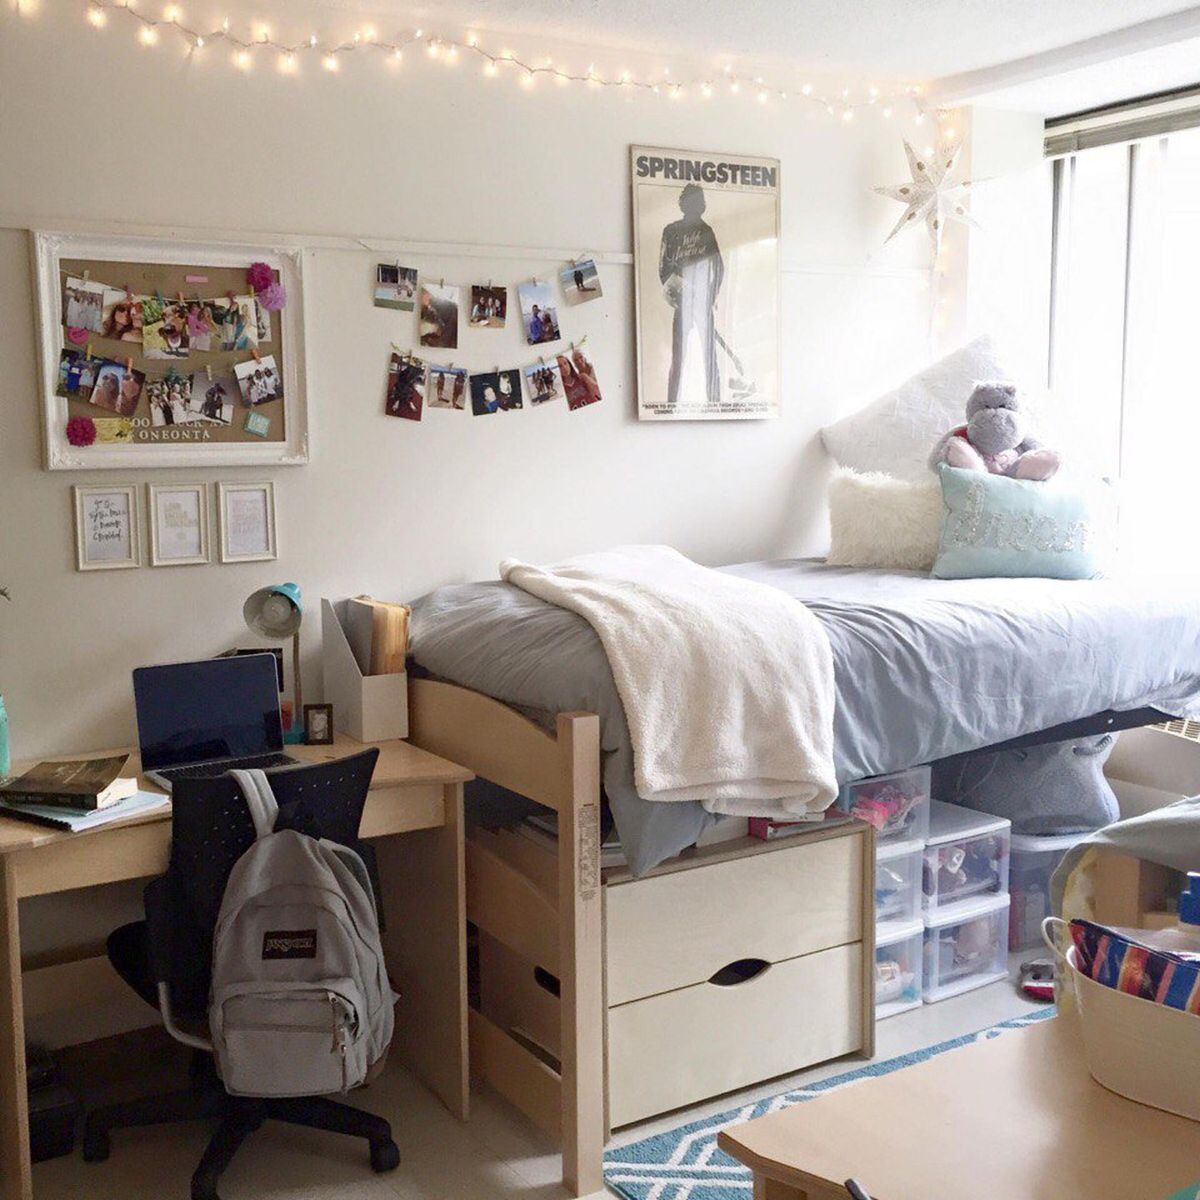 10 Things You Don't Need To Pack For College